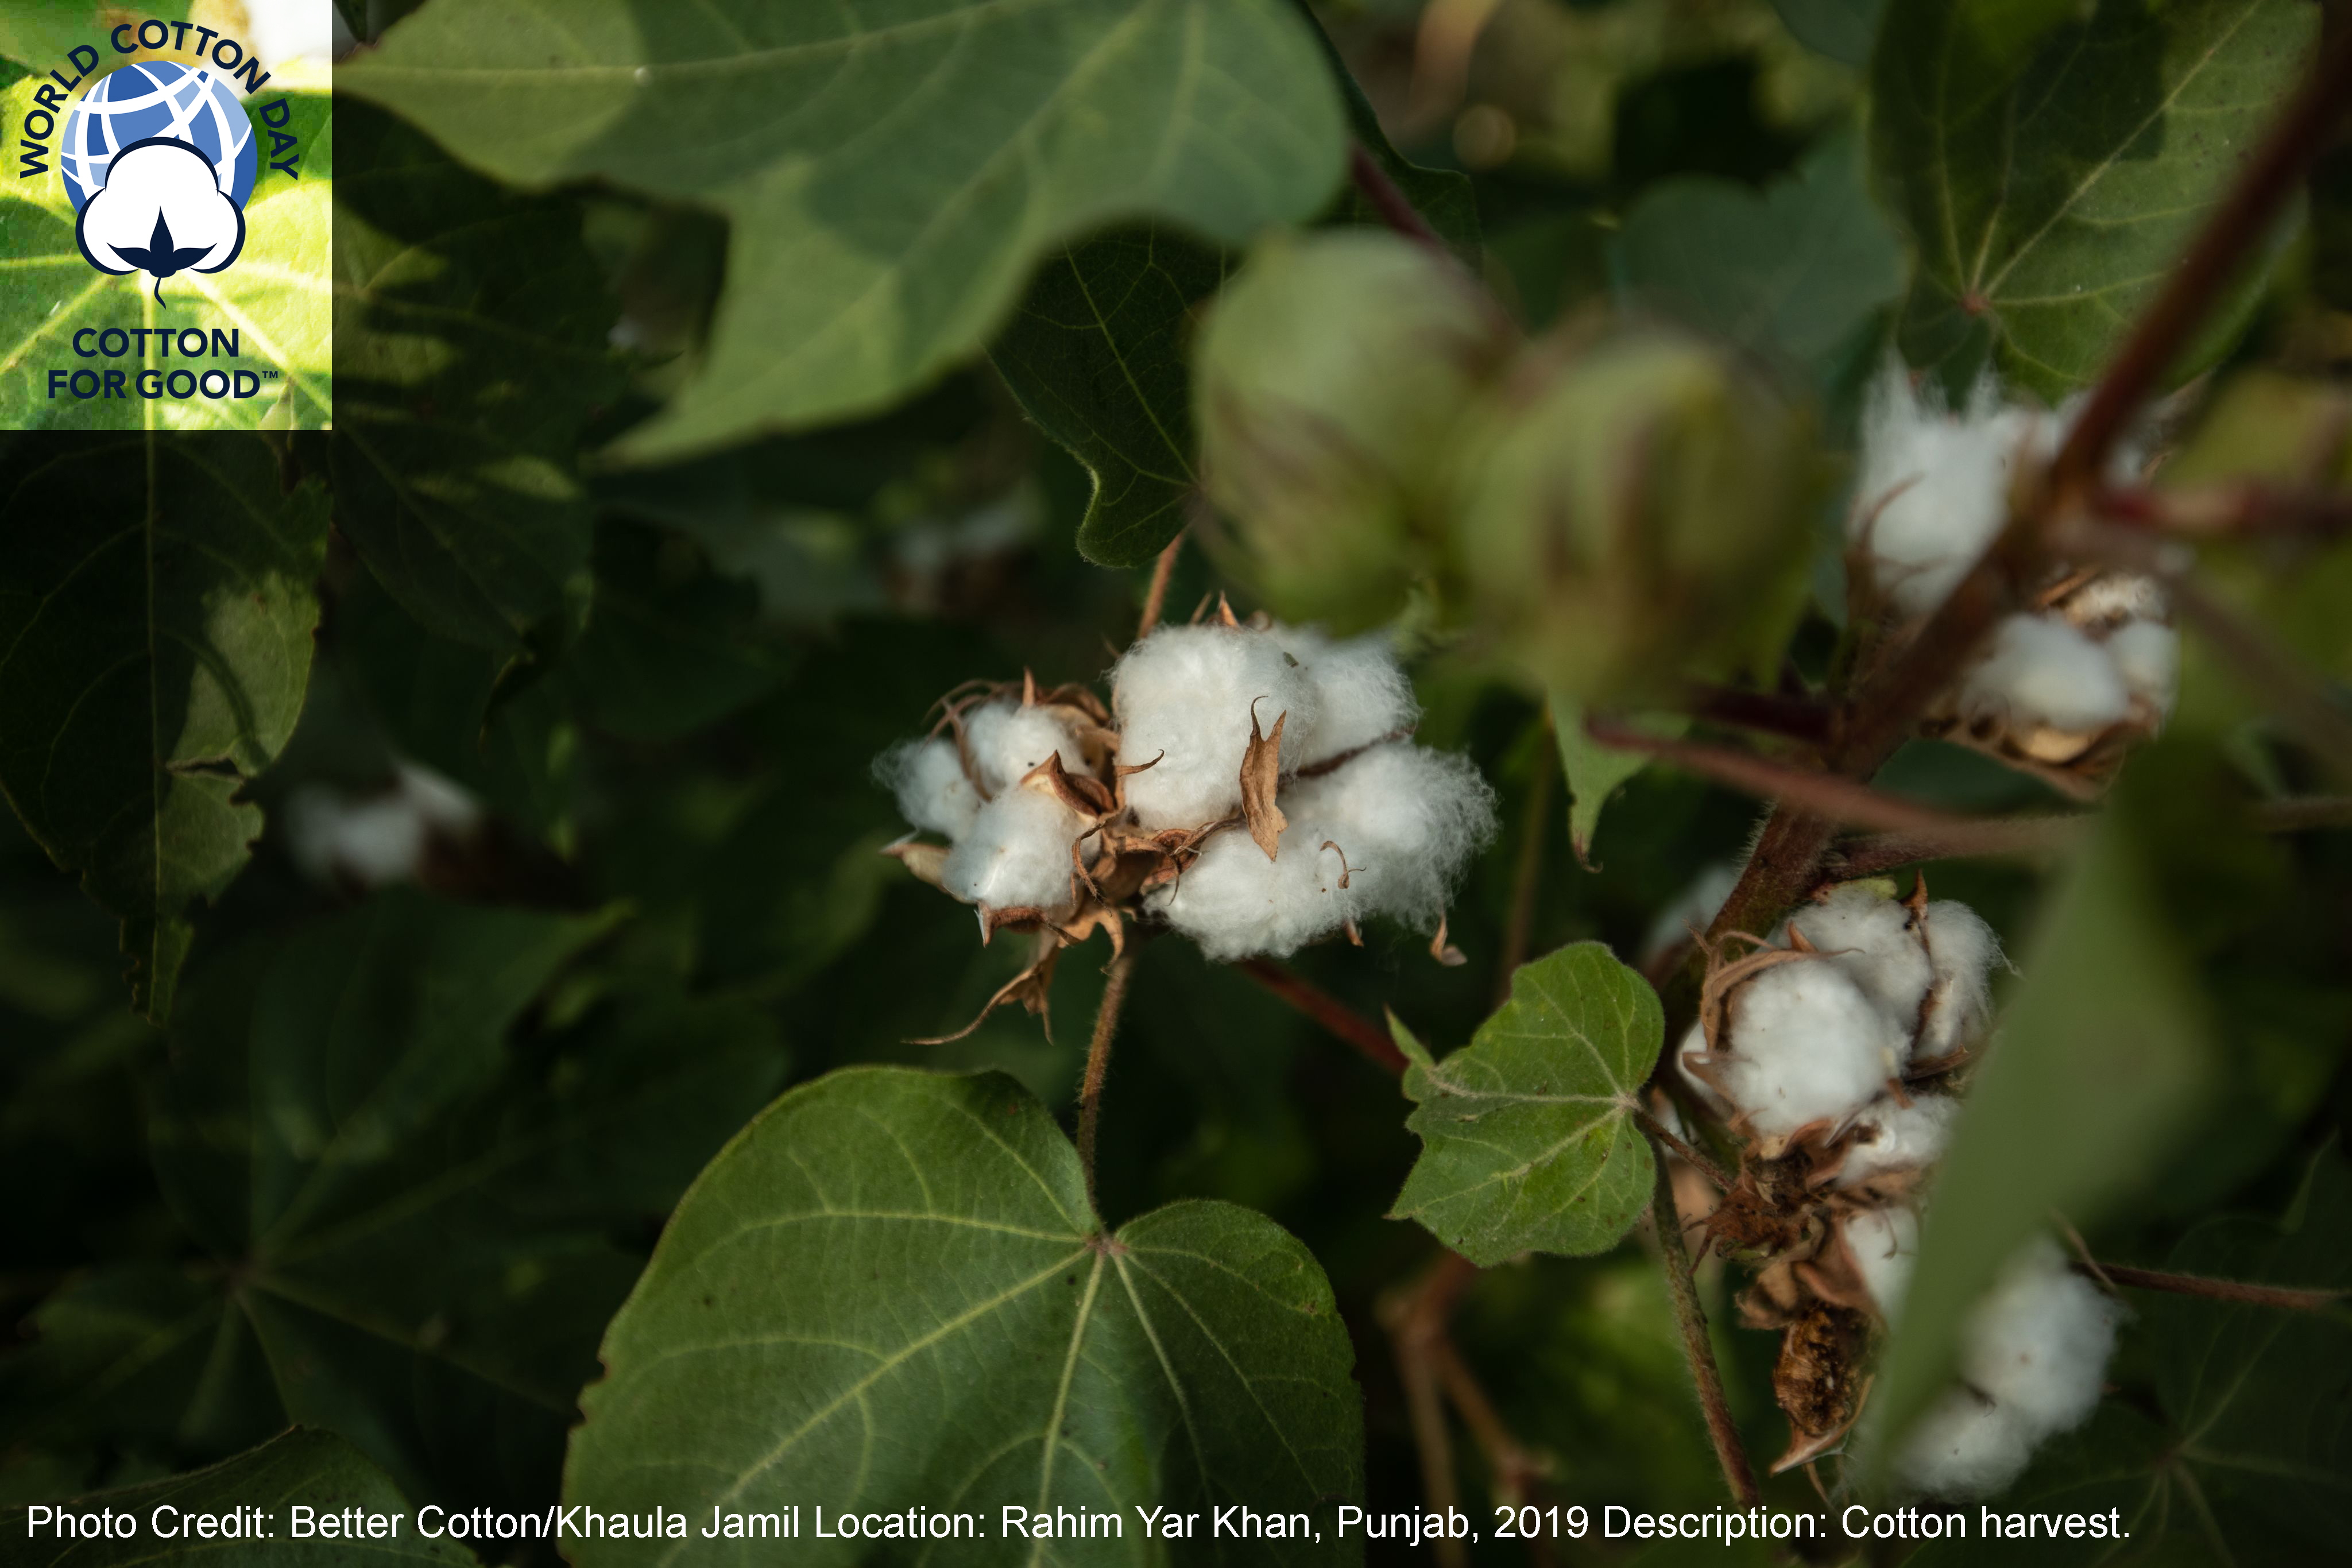 How Better Cotton Farmers Across the Globe Are Driving Sustainability Improvements